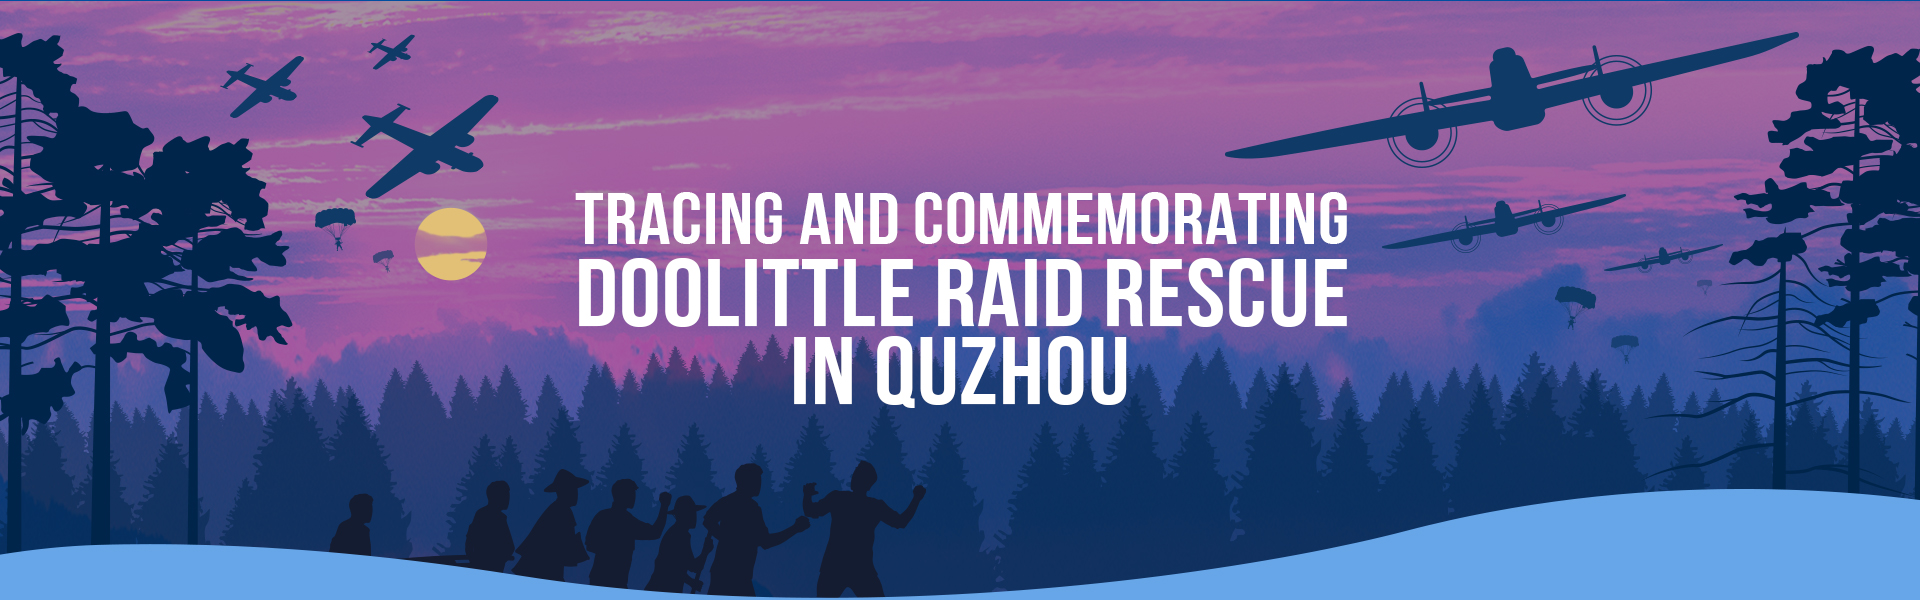 Tracing and Commemorating Doolittle Raid Rescue in Quzhou